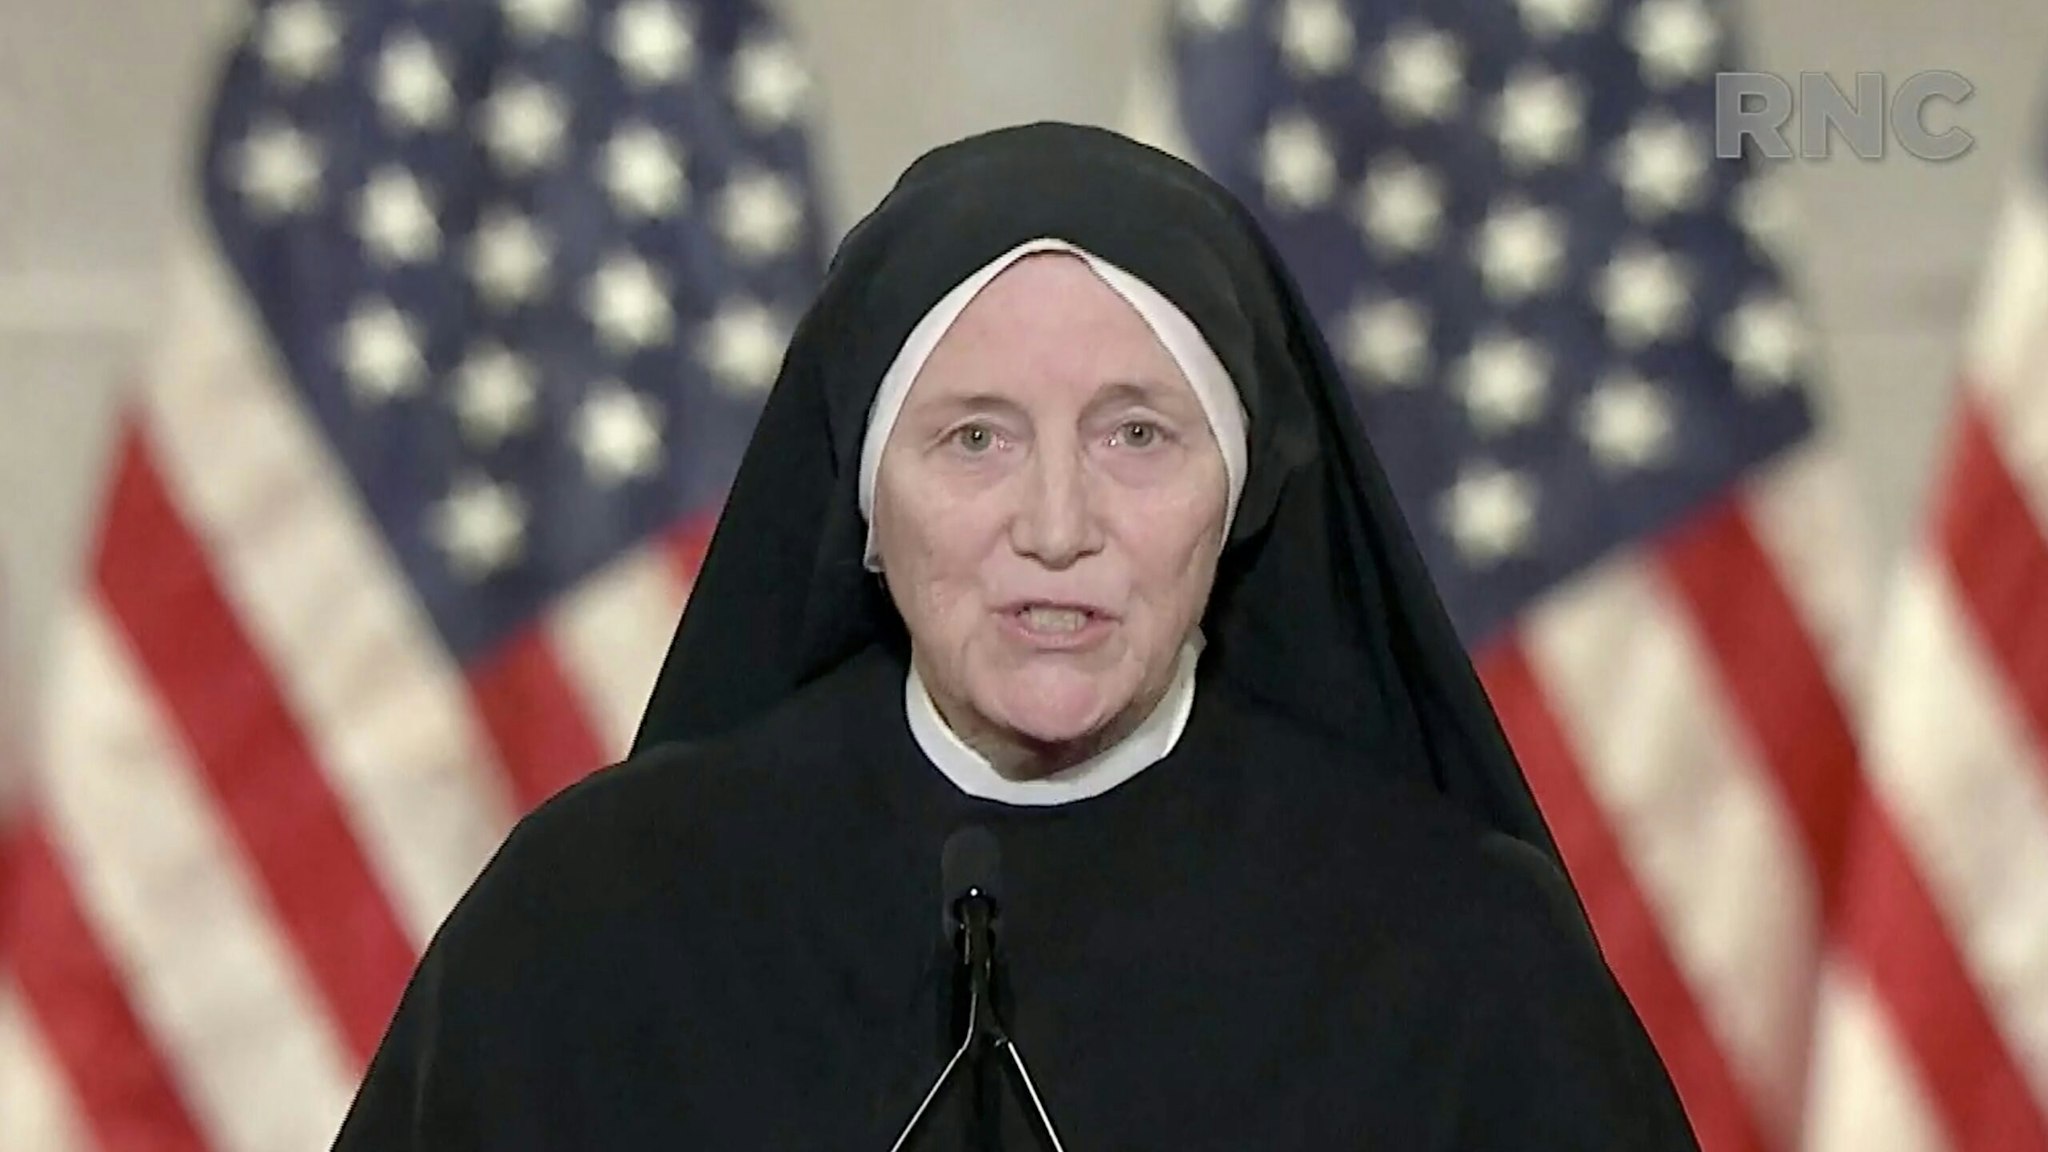 CHARLOTTE, NC - AUGUST 26: (EDITORIAL USE ONLY) In this screenshot from the RNC’s livestream of the 2020 Republican National Convention, Sister Dede Byrne, surgeon, military veteran and member of the Little Workers of the Sacred Hearts of Jesus and Mary, addresses the virtual convention on August 26, 2020. The convention is being held virtually due to the coronavirus pandemic but will include speeches from various locations including Charlotte, North Carolina and Washington, DC. (Photo Courtesy of the Committee on Arrangements for the 2020 Republican National Committee via Getty Images)